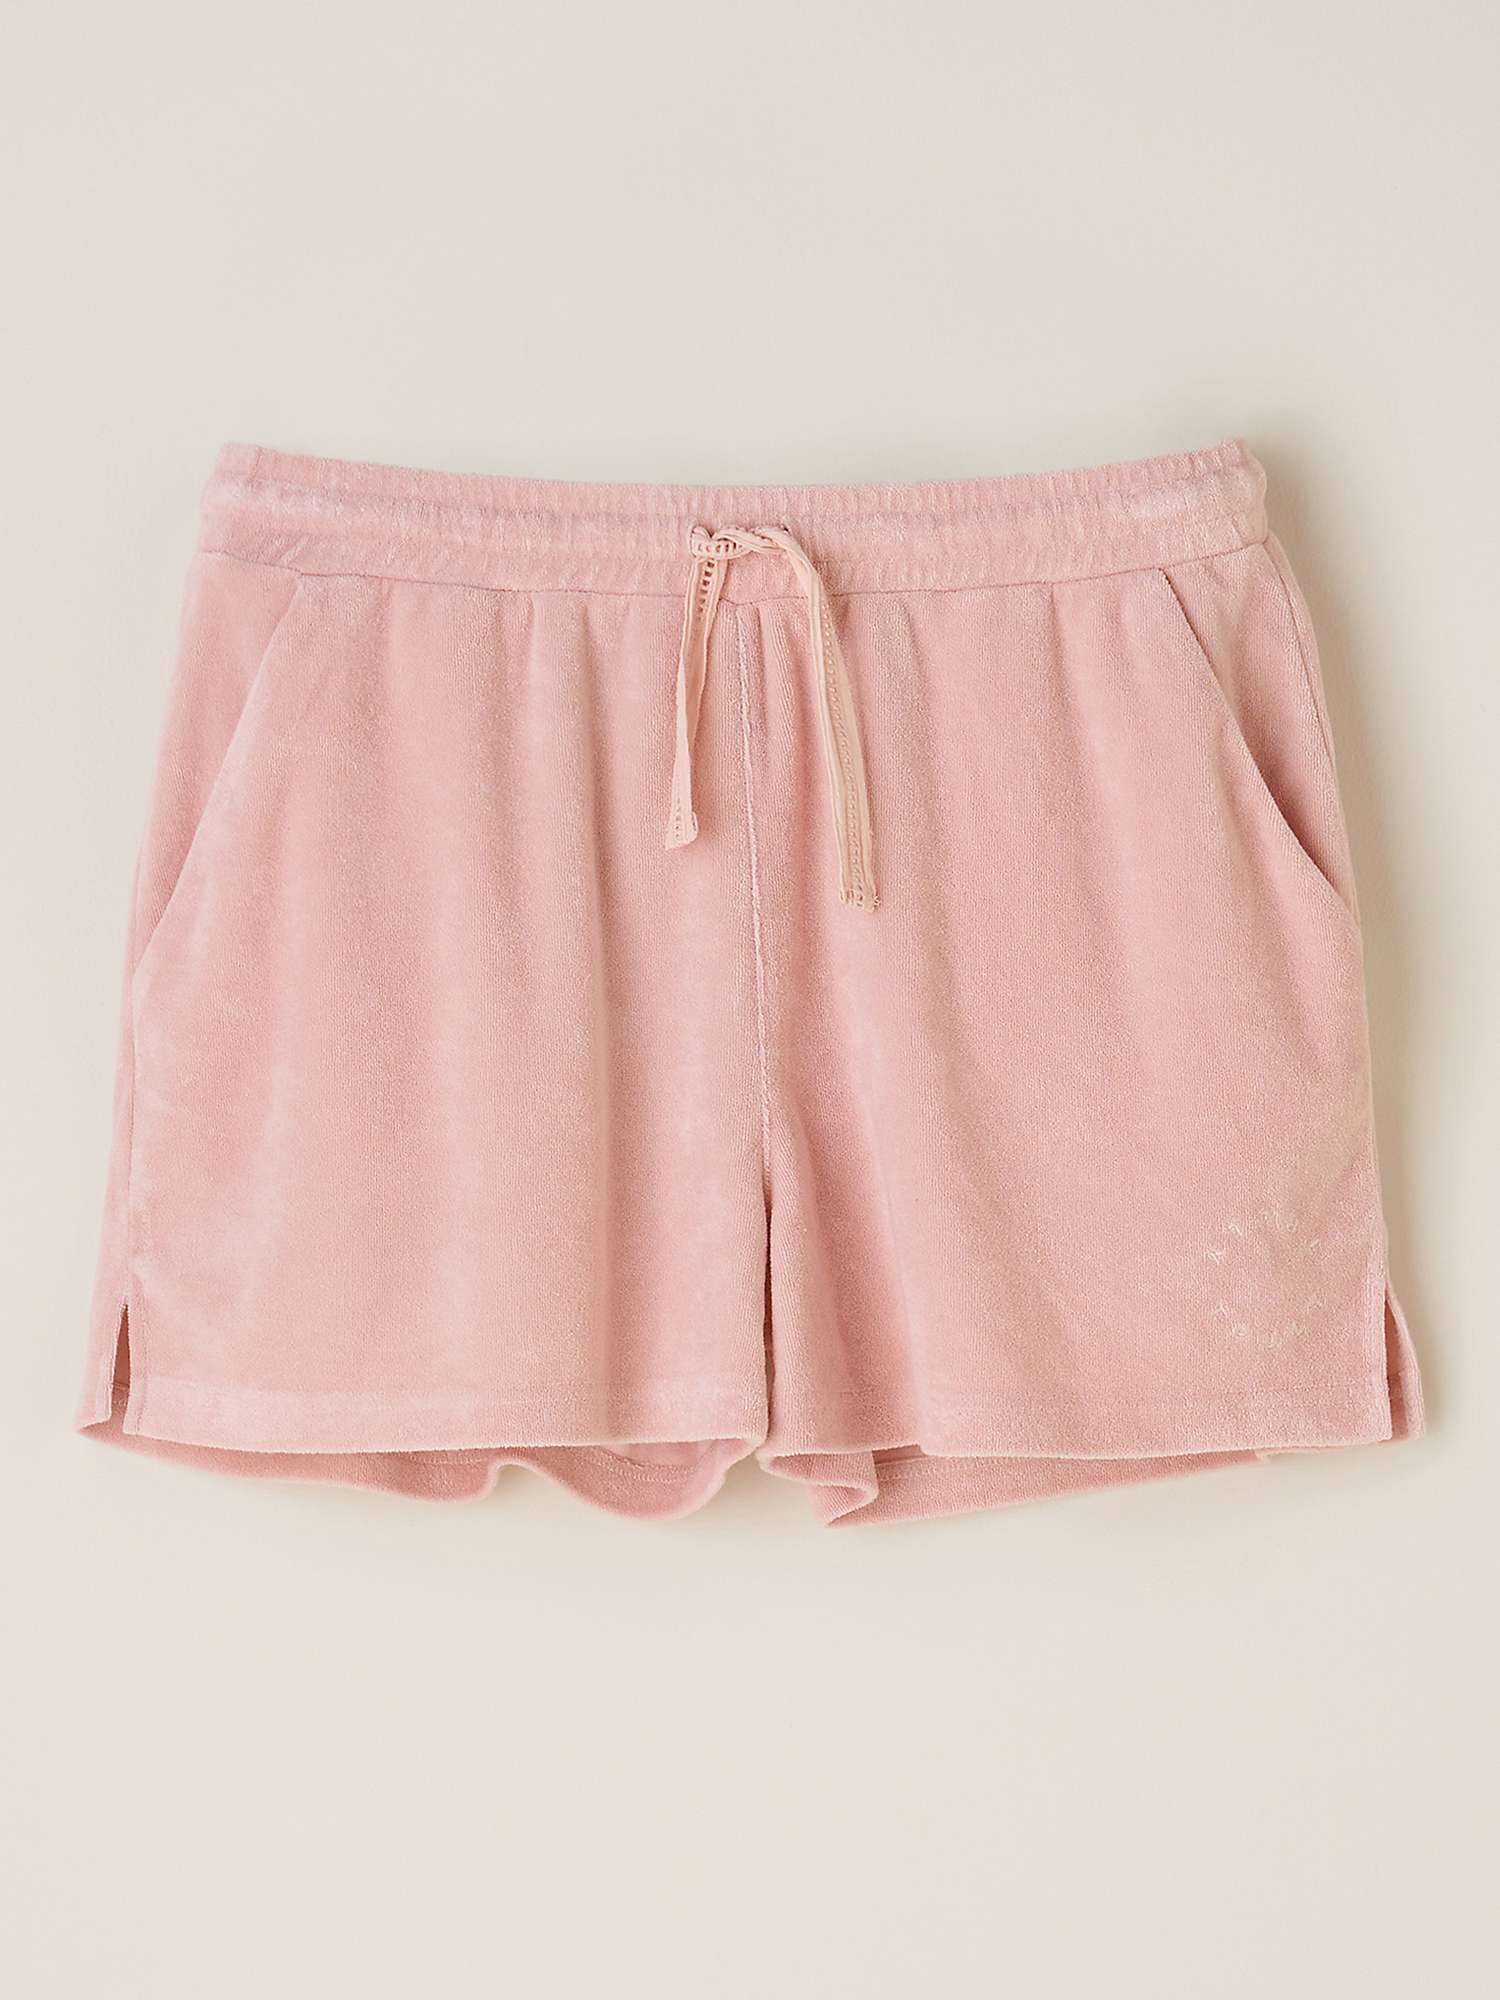 Buy Truly Terry Shorts Online at johnlewis.com